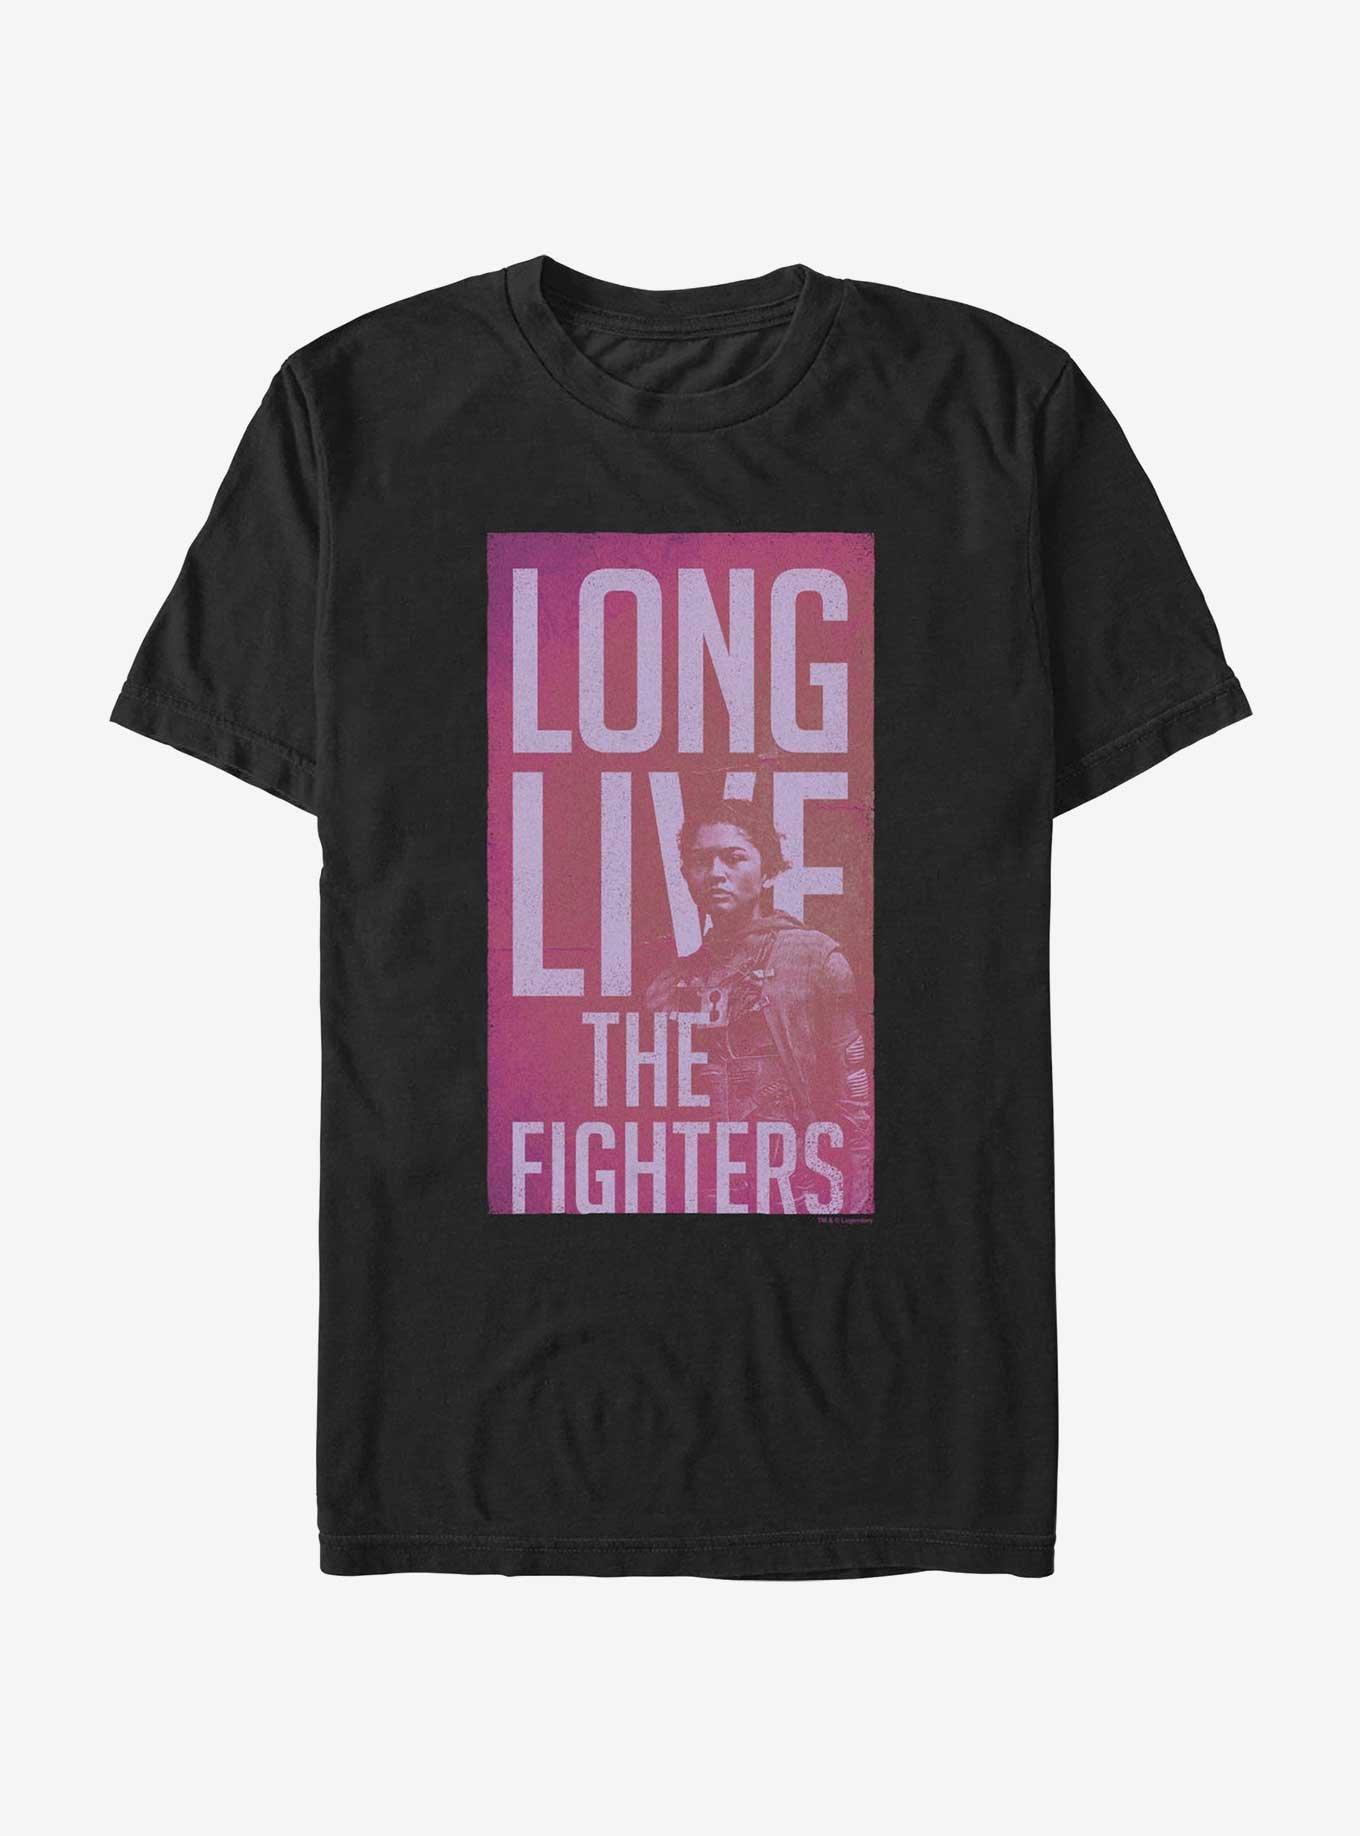 Dune: Part Two Long Live The Fighters Chani T-Shirt